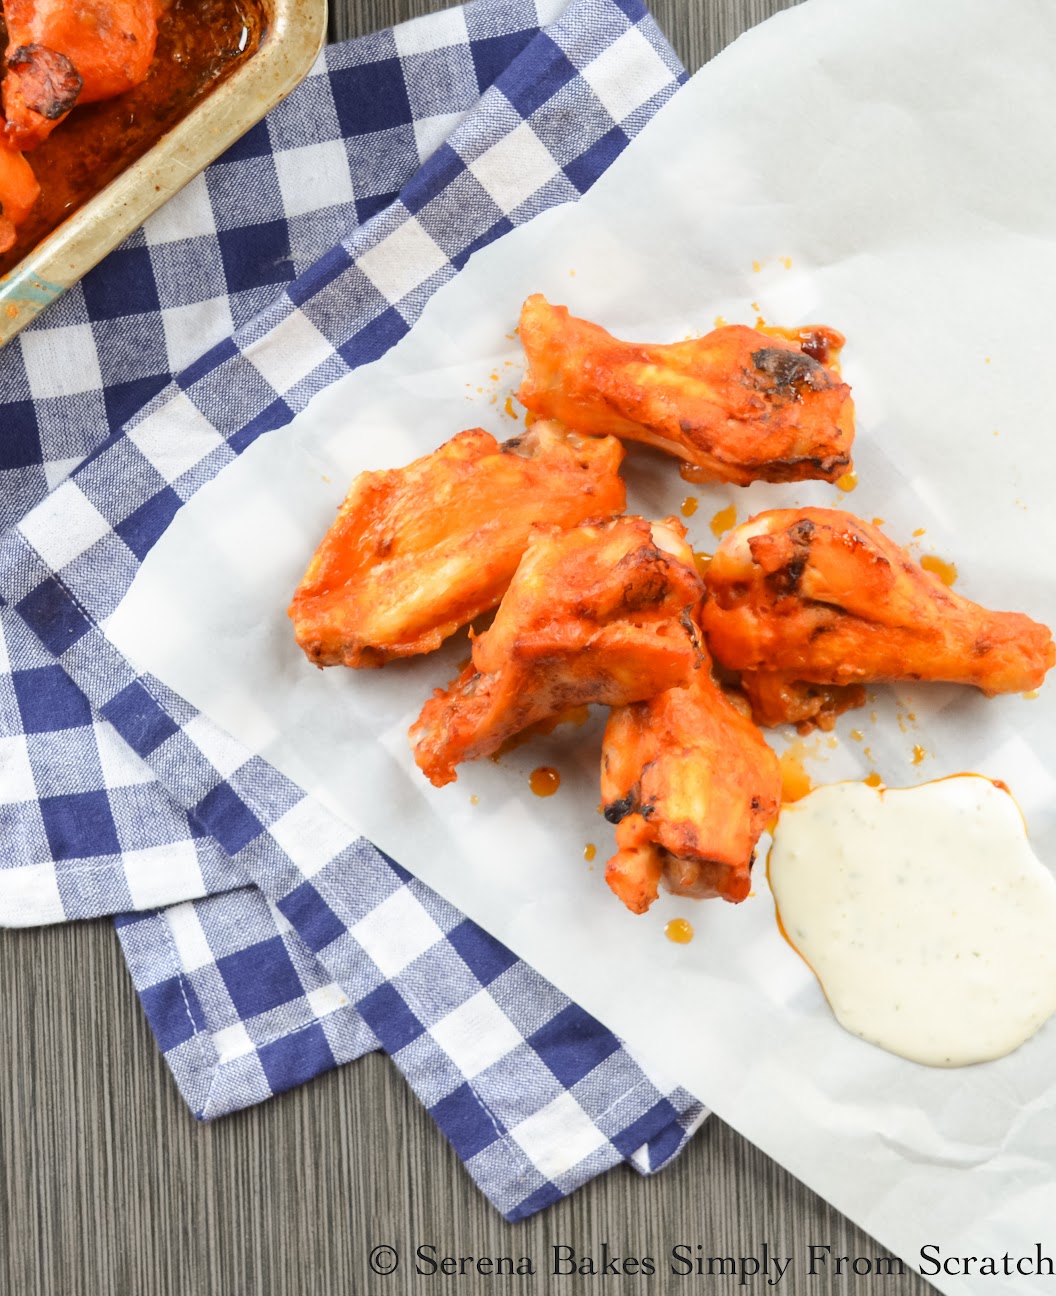 Baked Chicken Hot Wings are simple to make with a crispy on the outside, but juicy on the inside. A favorite recipe for Super Bowl from Serena Bakes Simply From Scratch.